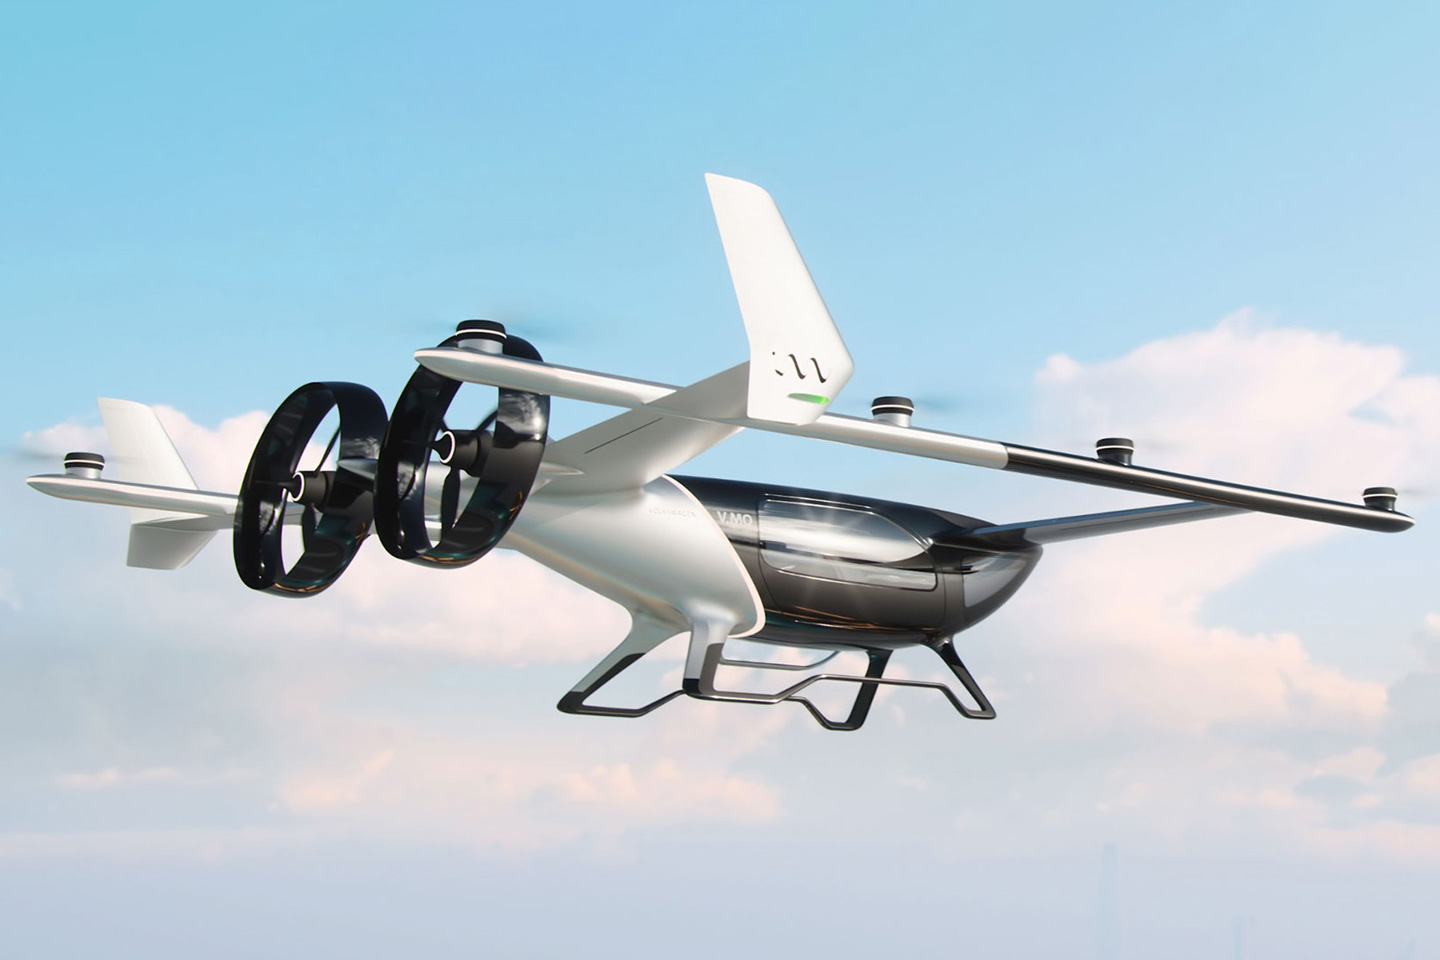 #Volkswagen just announced that they’ve been working on their first eVTOL ‘flying car’